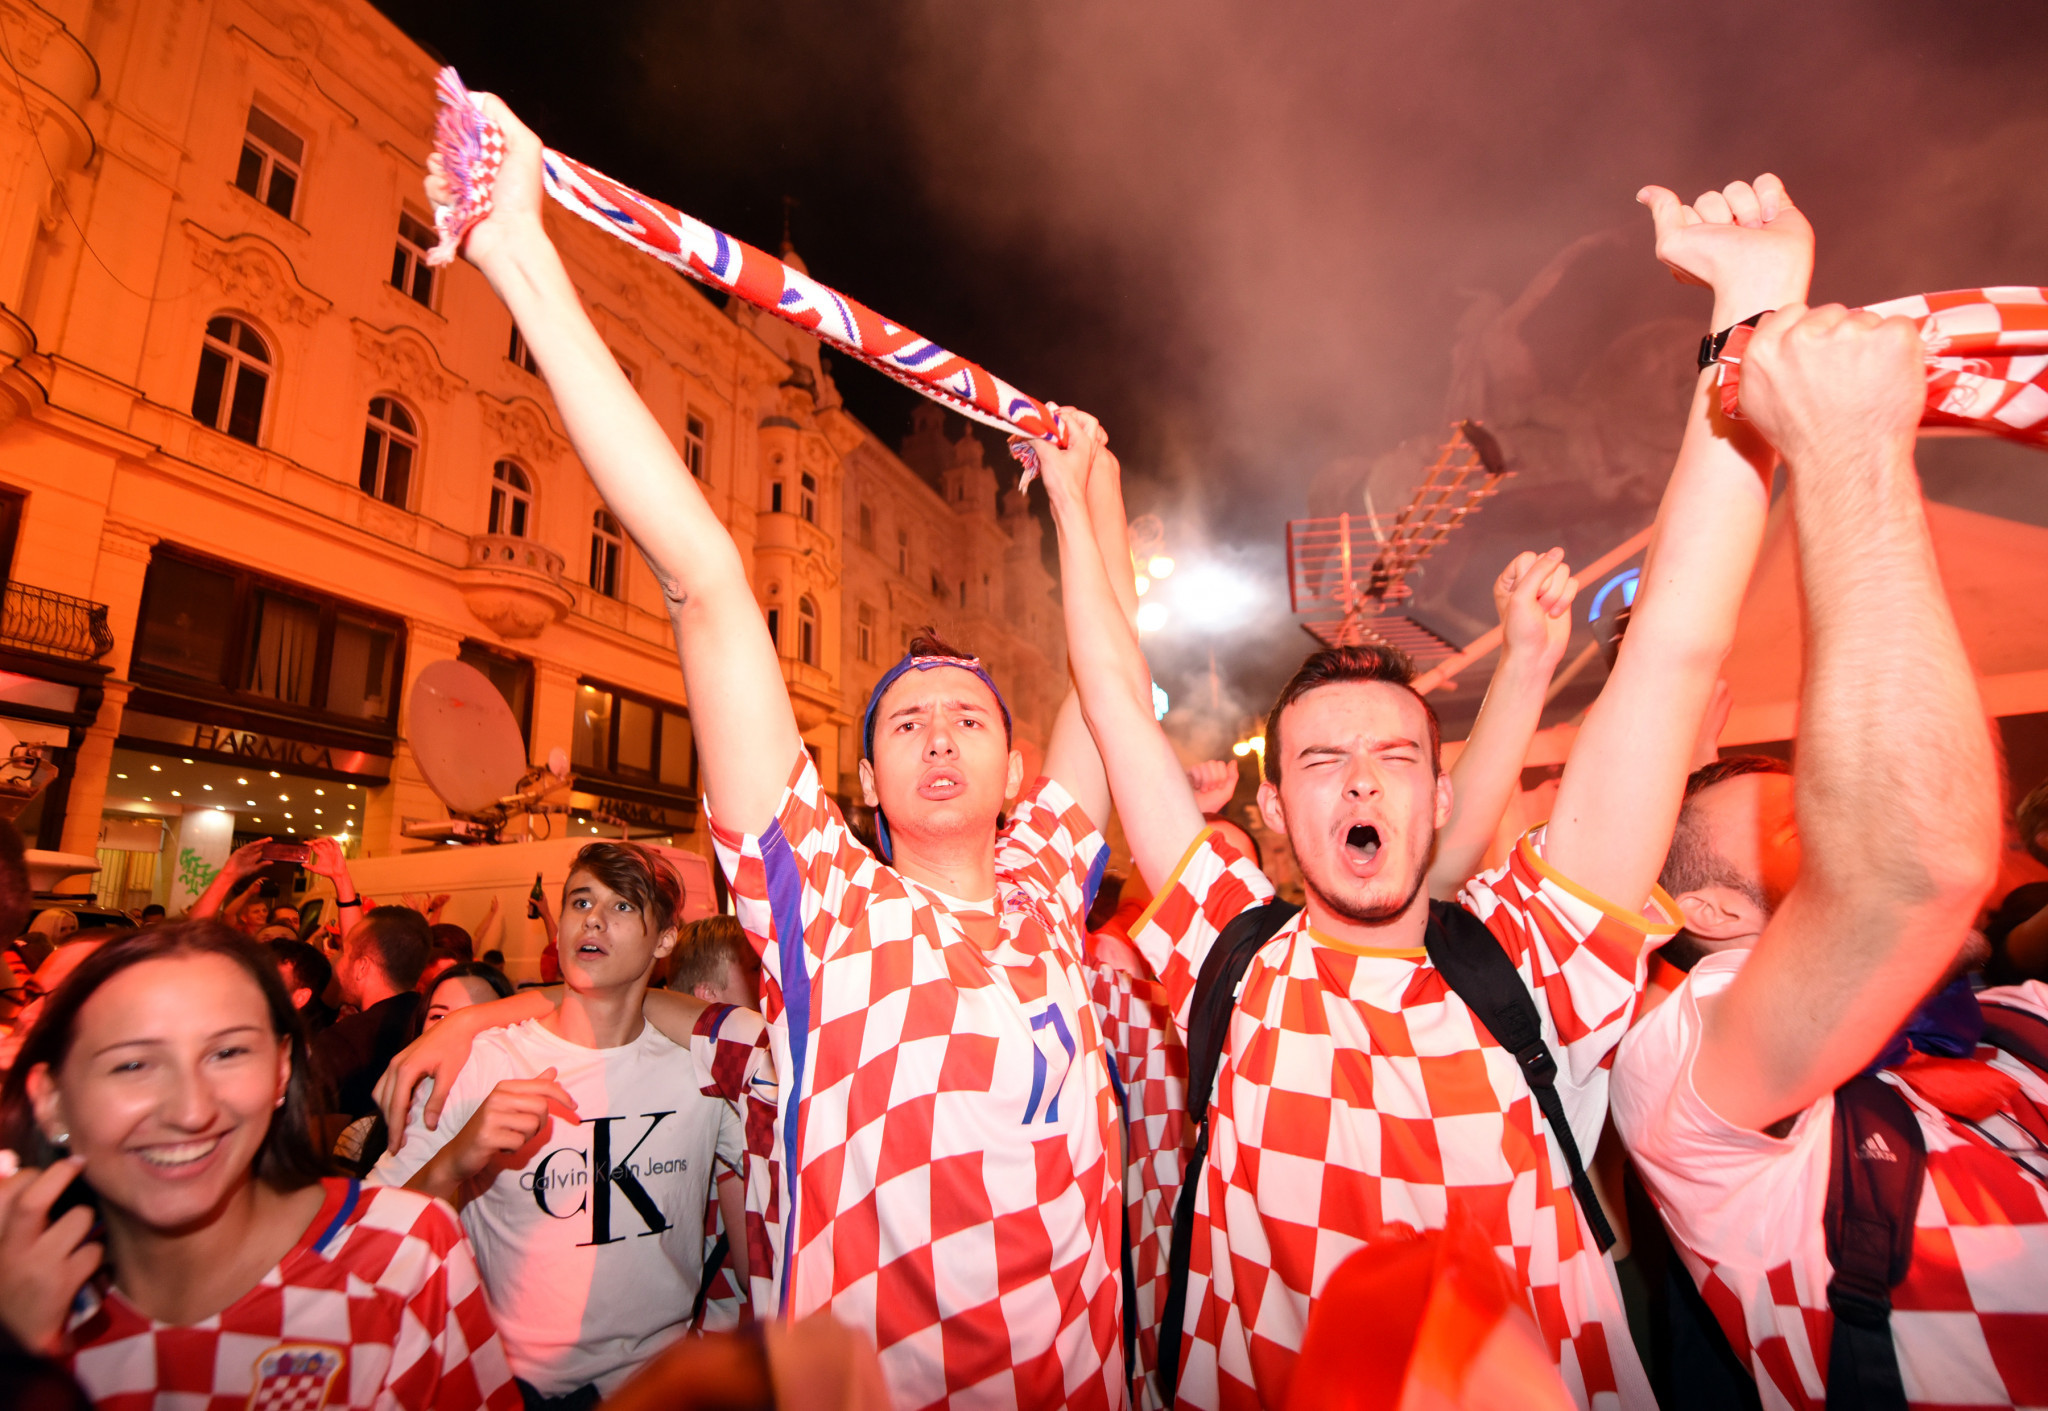 Croatia's fans celebrate victory against Russia in the Croatian capital Zagreb's main square after the 2018 FIFA World Cup Russia Round of 8 match between Russia and Croatia ©Getty Images